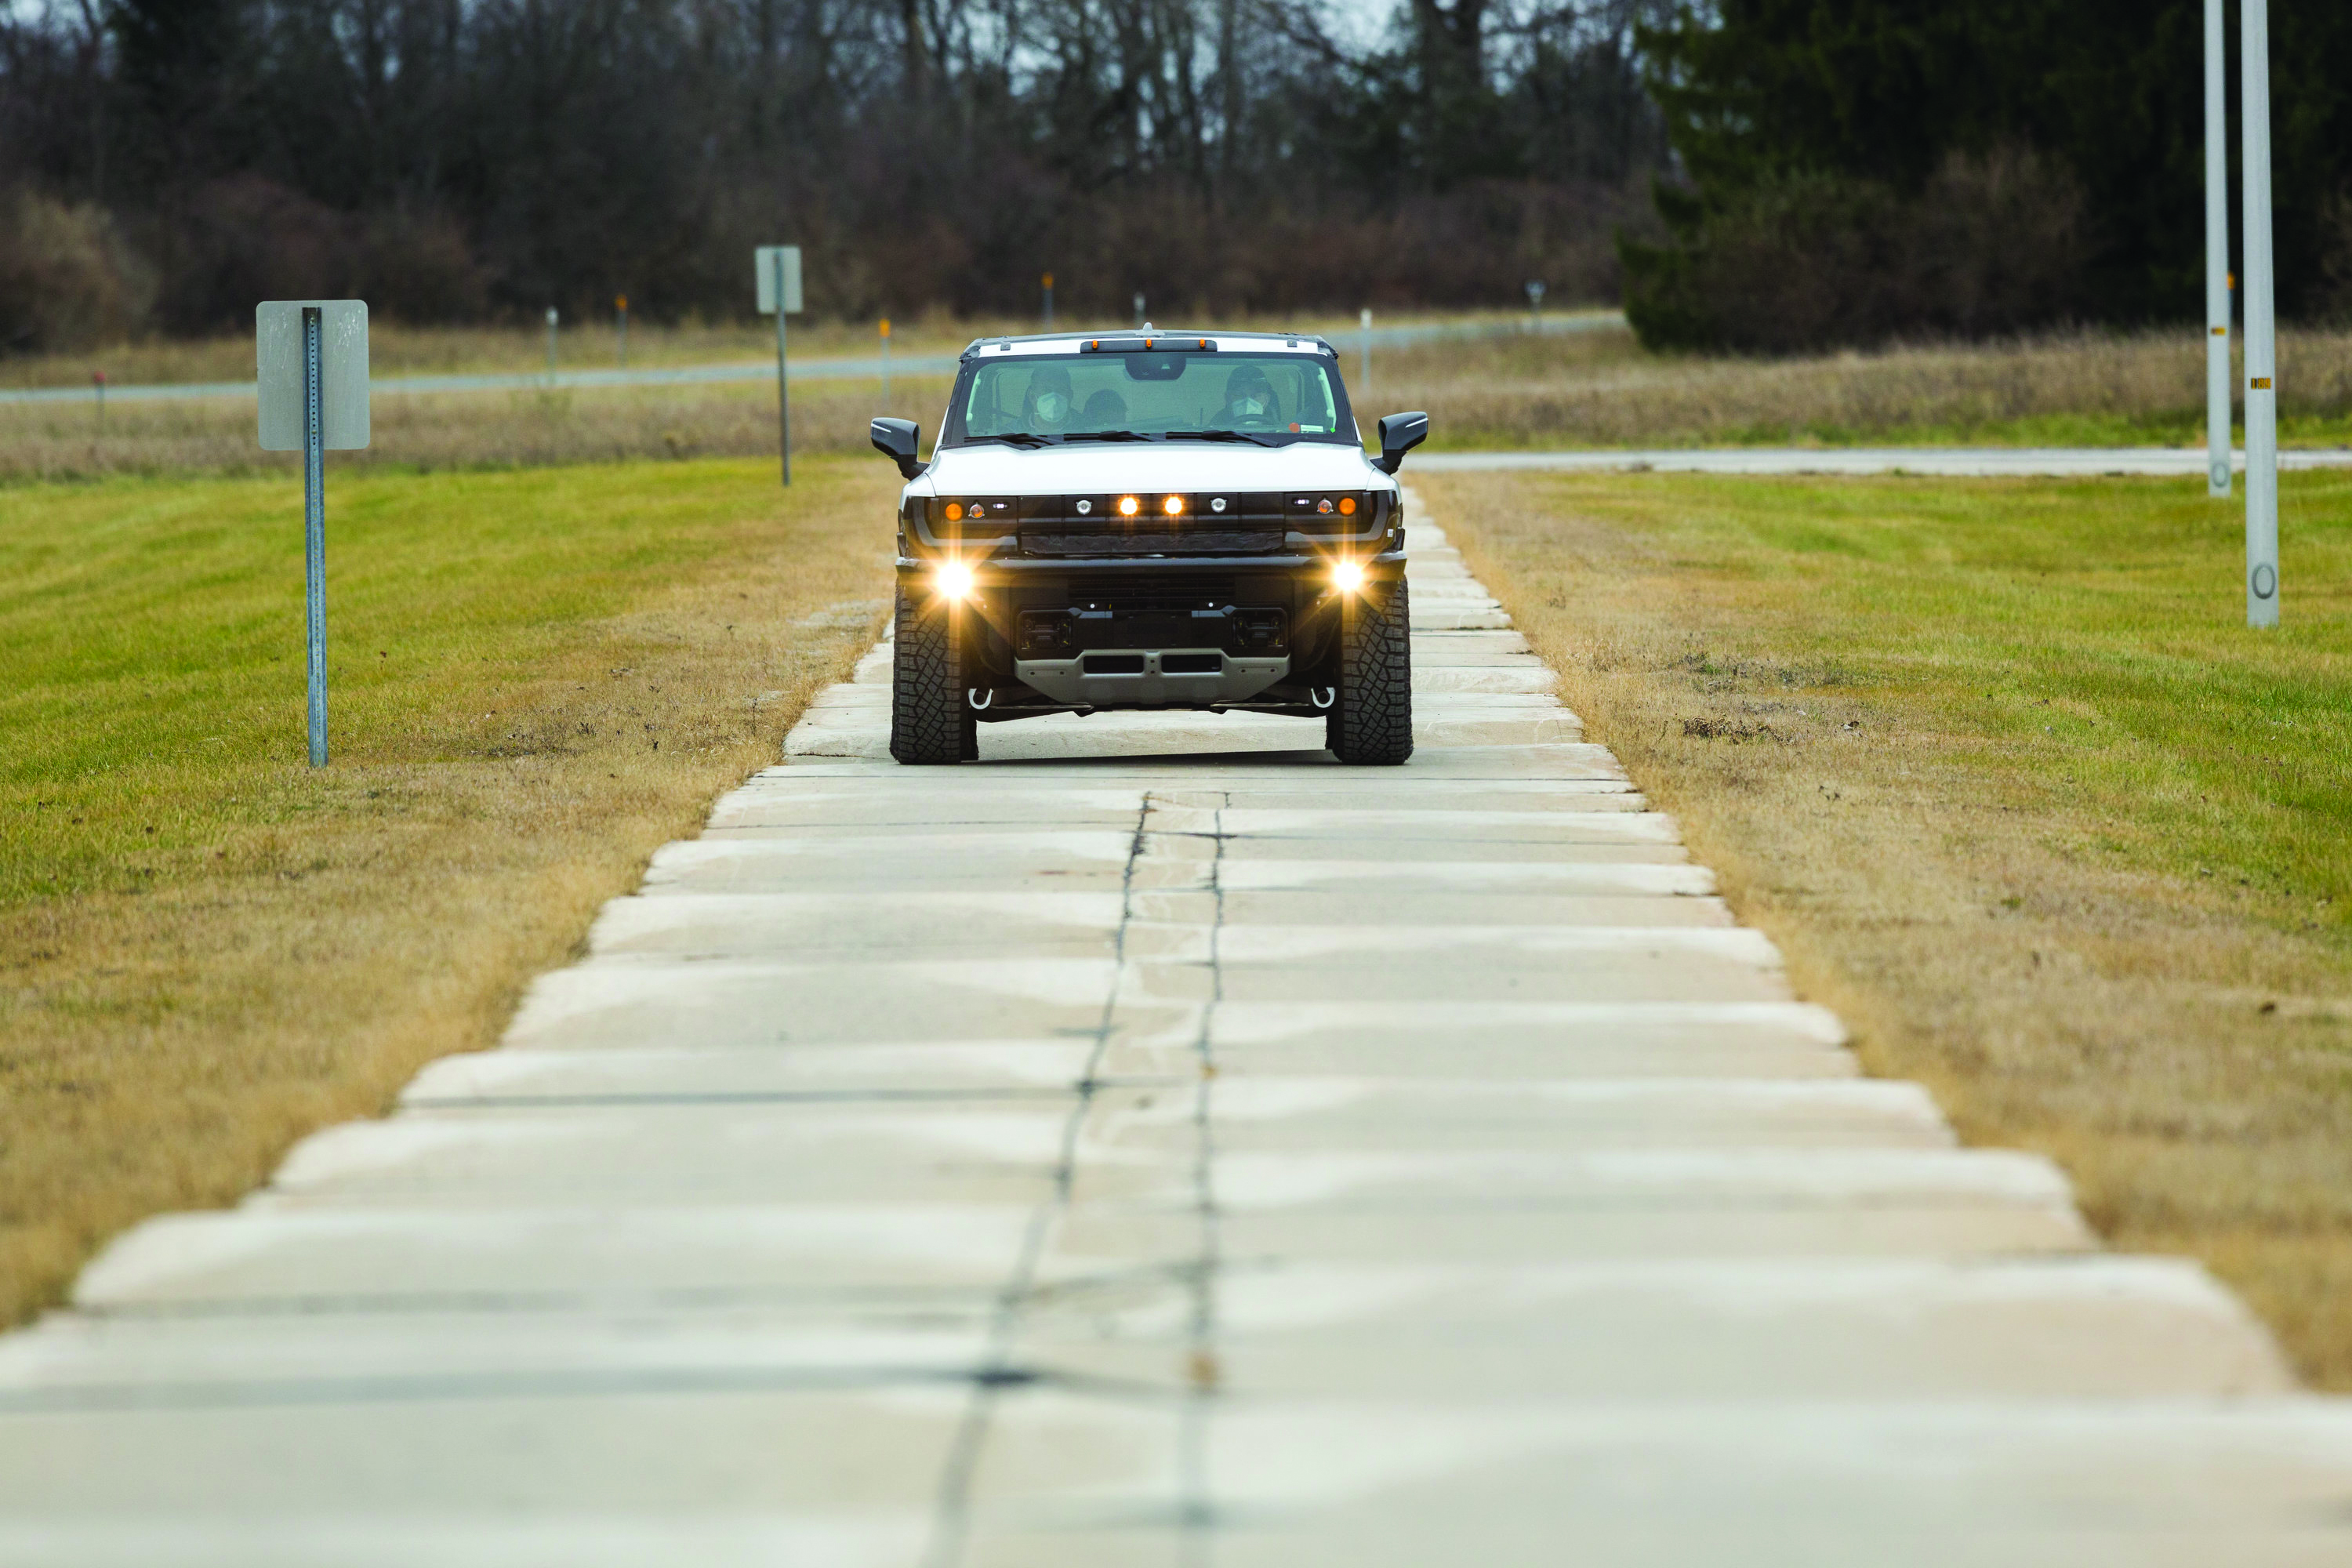 The GMC Hummer EV arrived at GM’s Milford Proving Ground in  late 2020 to continue validation testing